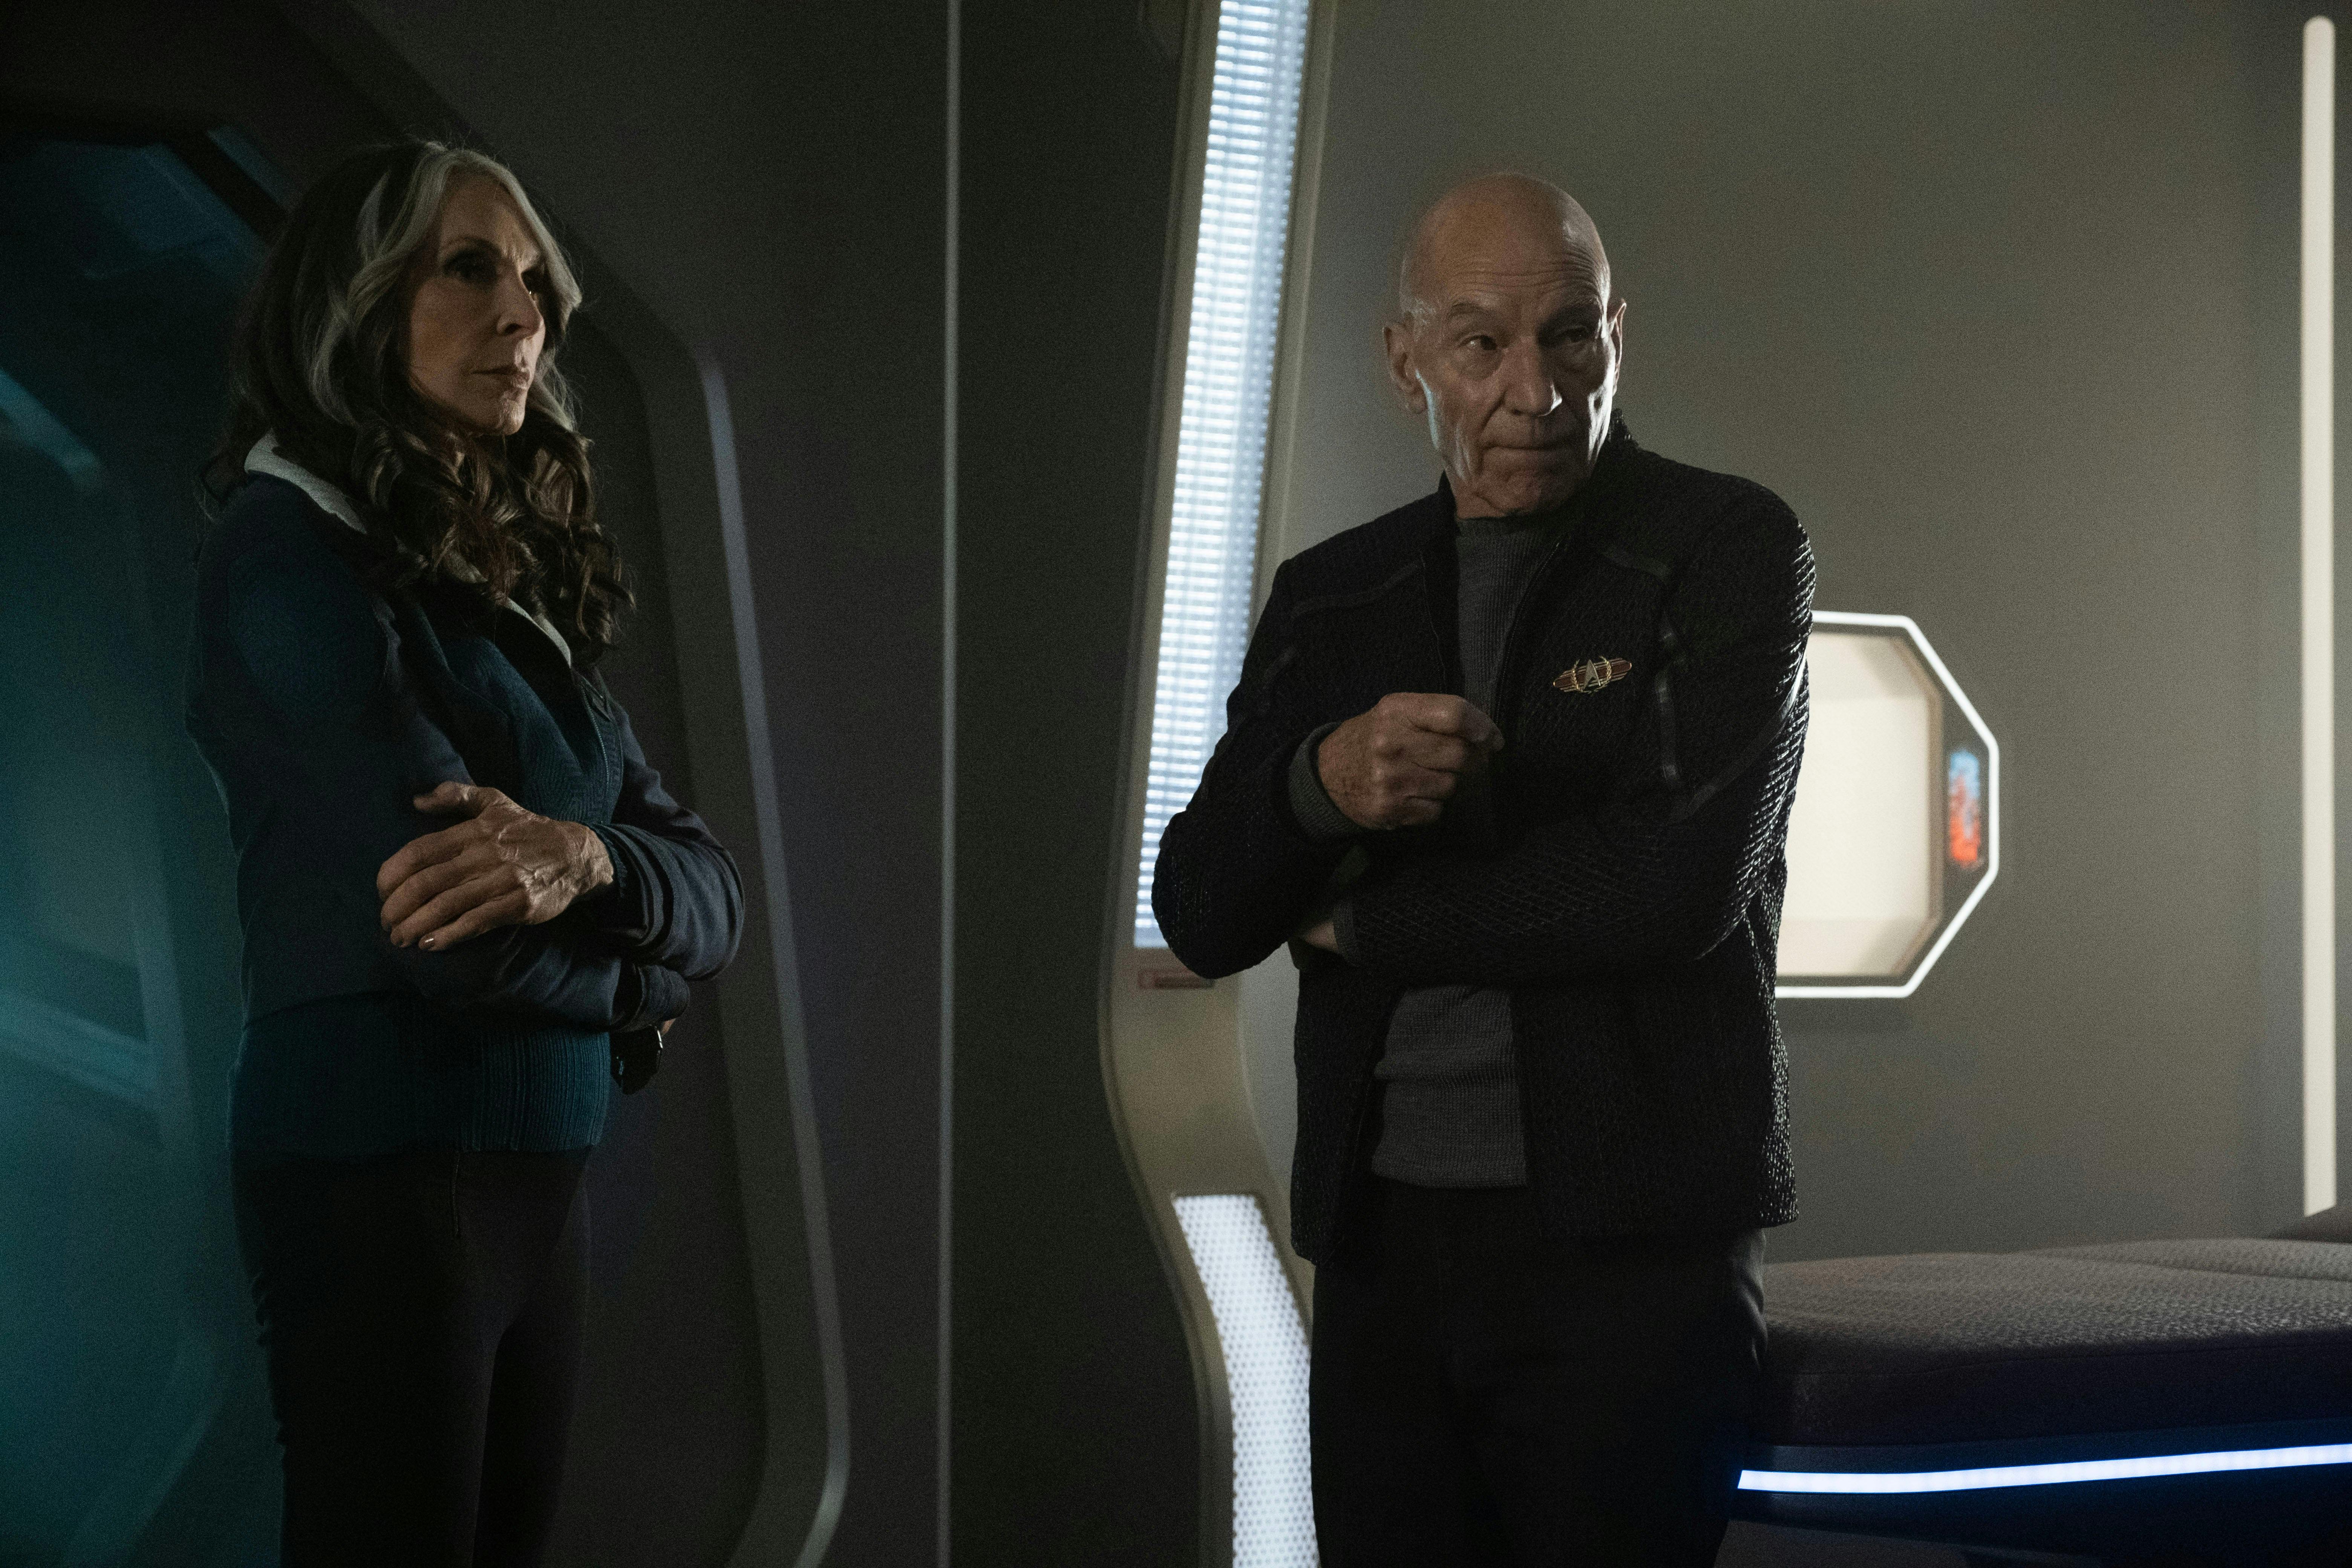 Dr. Beverly Crusher and Picard stand both with their arms crossed over themselves